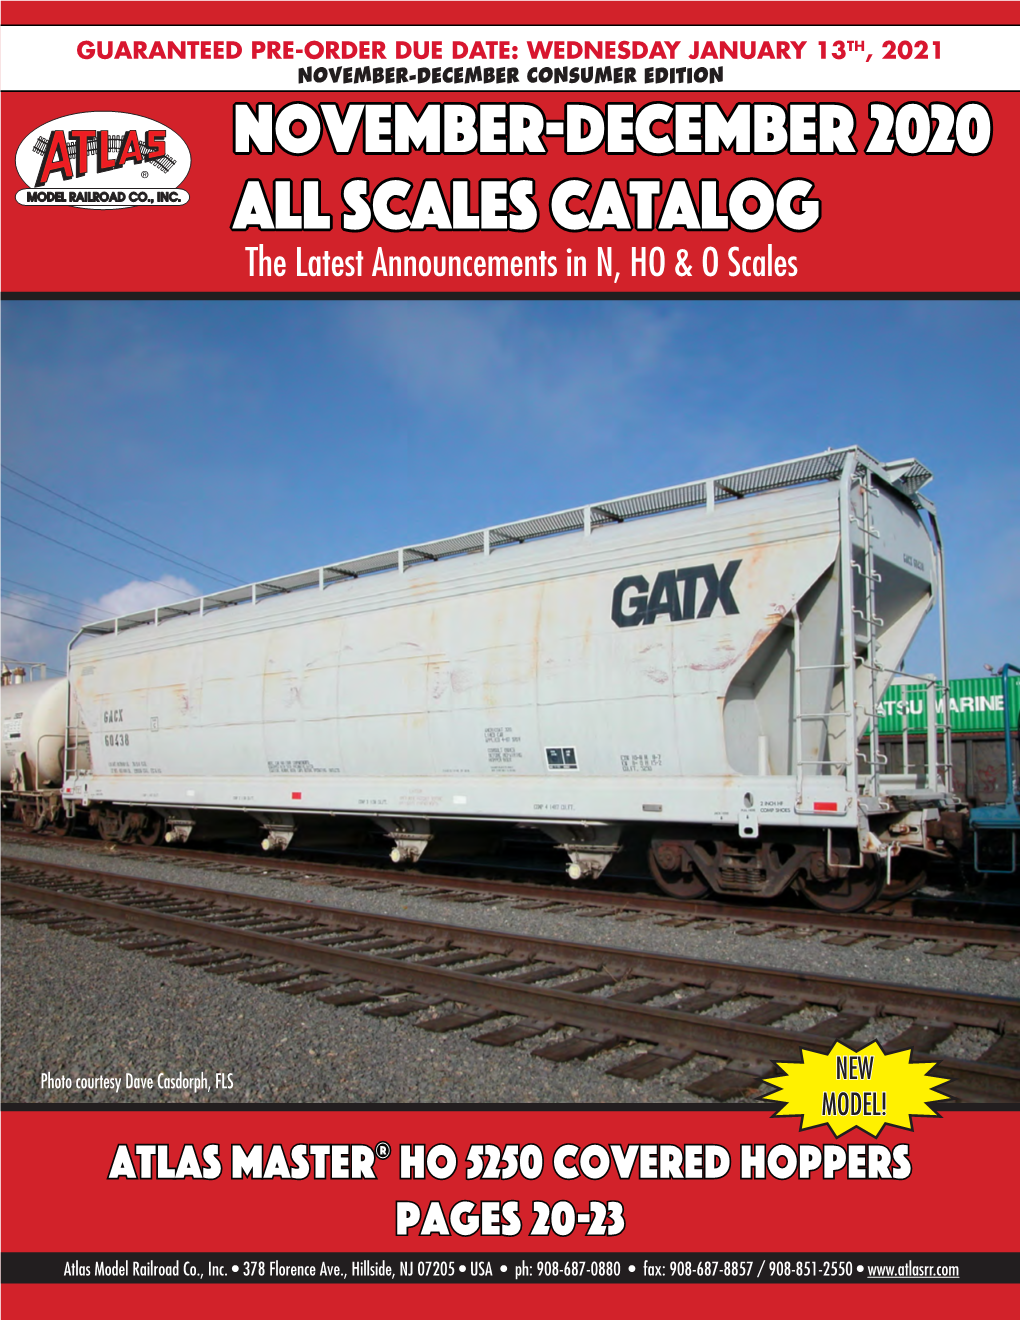 November-DECEMBER 2020 All Scales Catalog the Latest Announcements in N, HO & O Scales